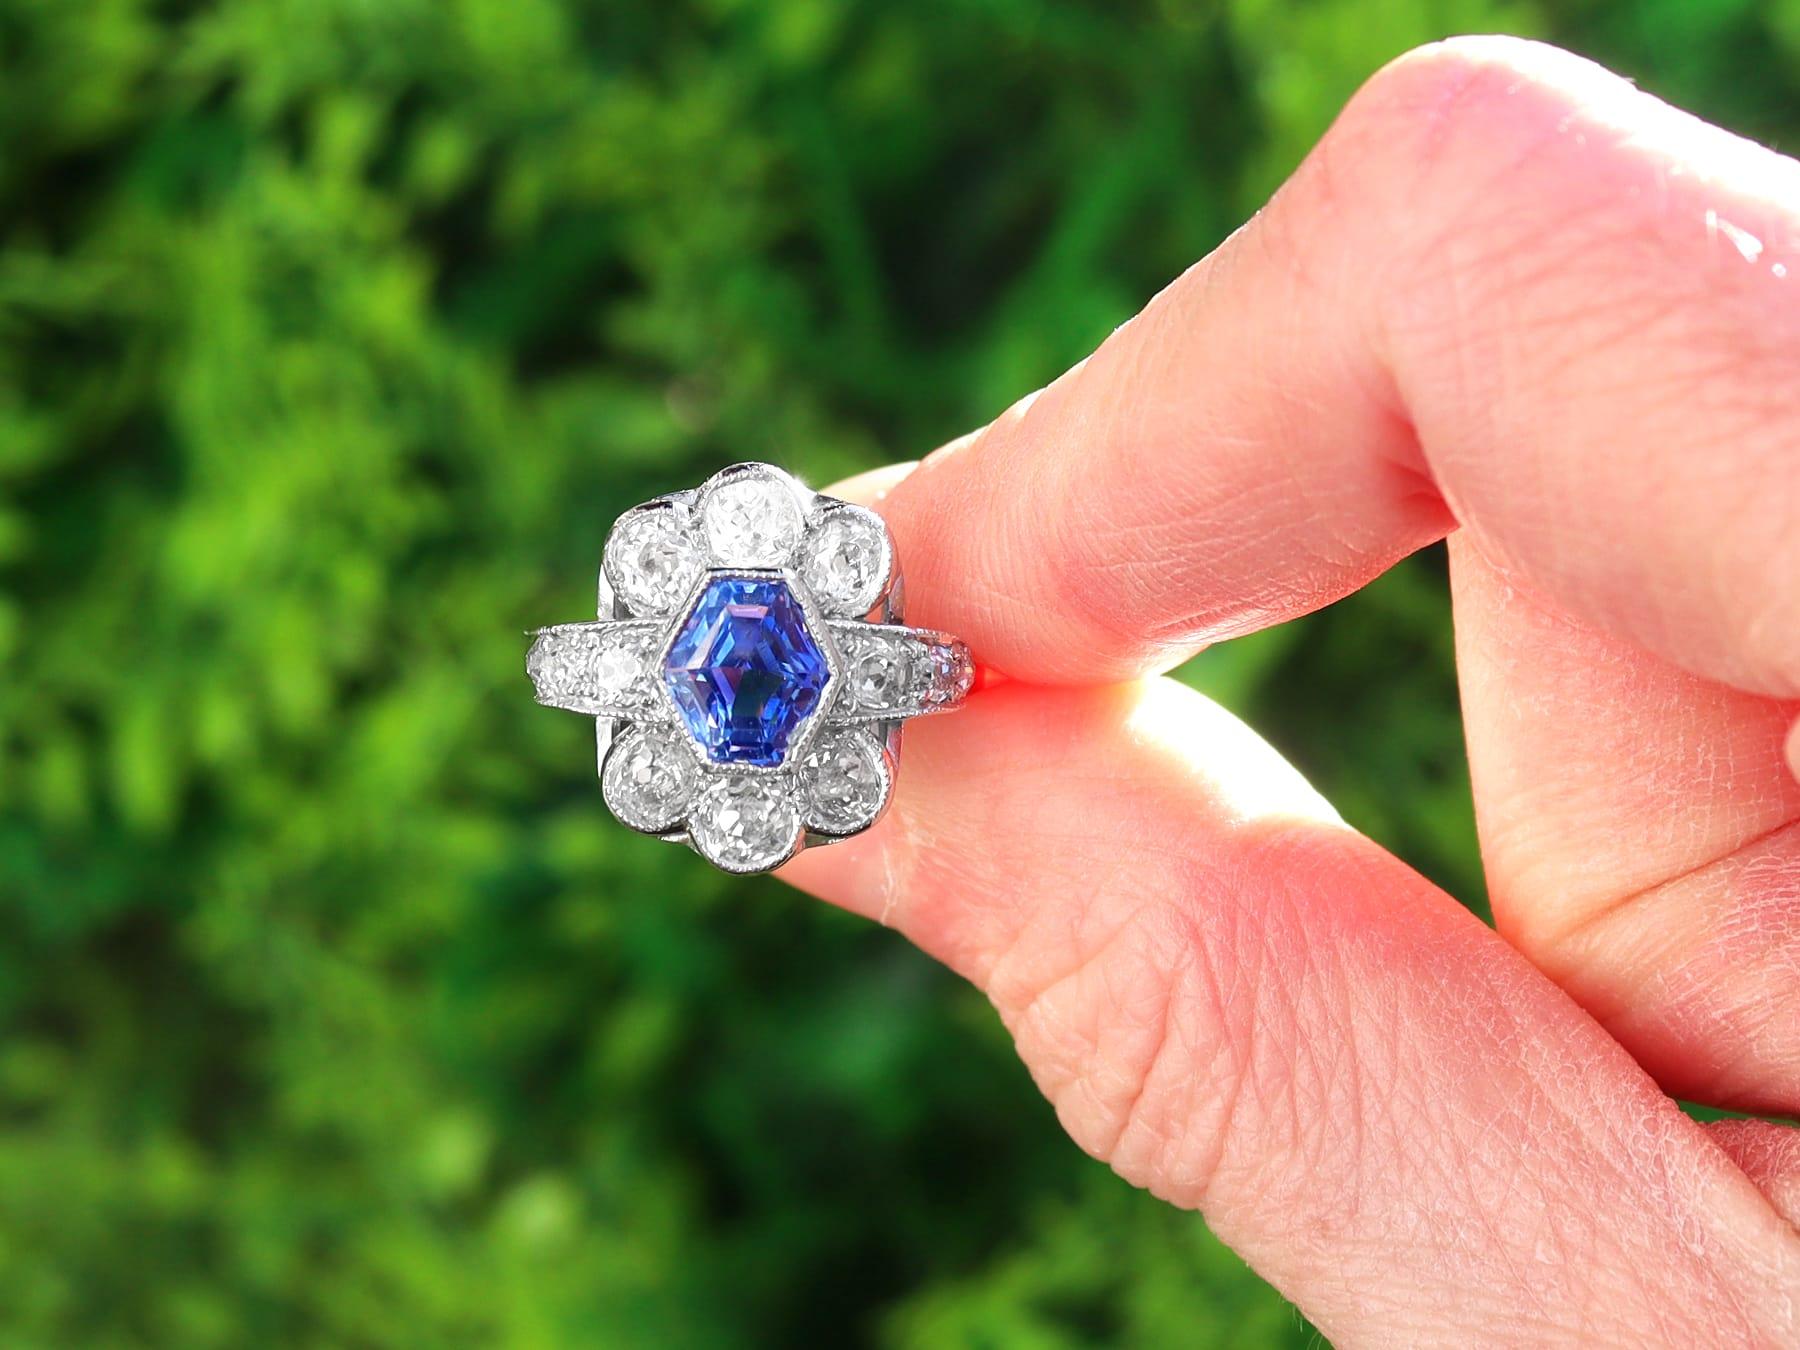 A stunning antique 1930's 2.56 carat Ceylon sapphire and 2.66 carat diamond, platinum cluster style dress ring; part of our diverse antique jewelry and estate jewelry collections.

This stunning, fine and impressive antique sapphire and diamond ring